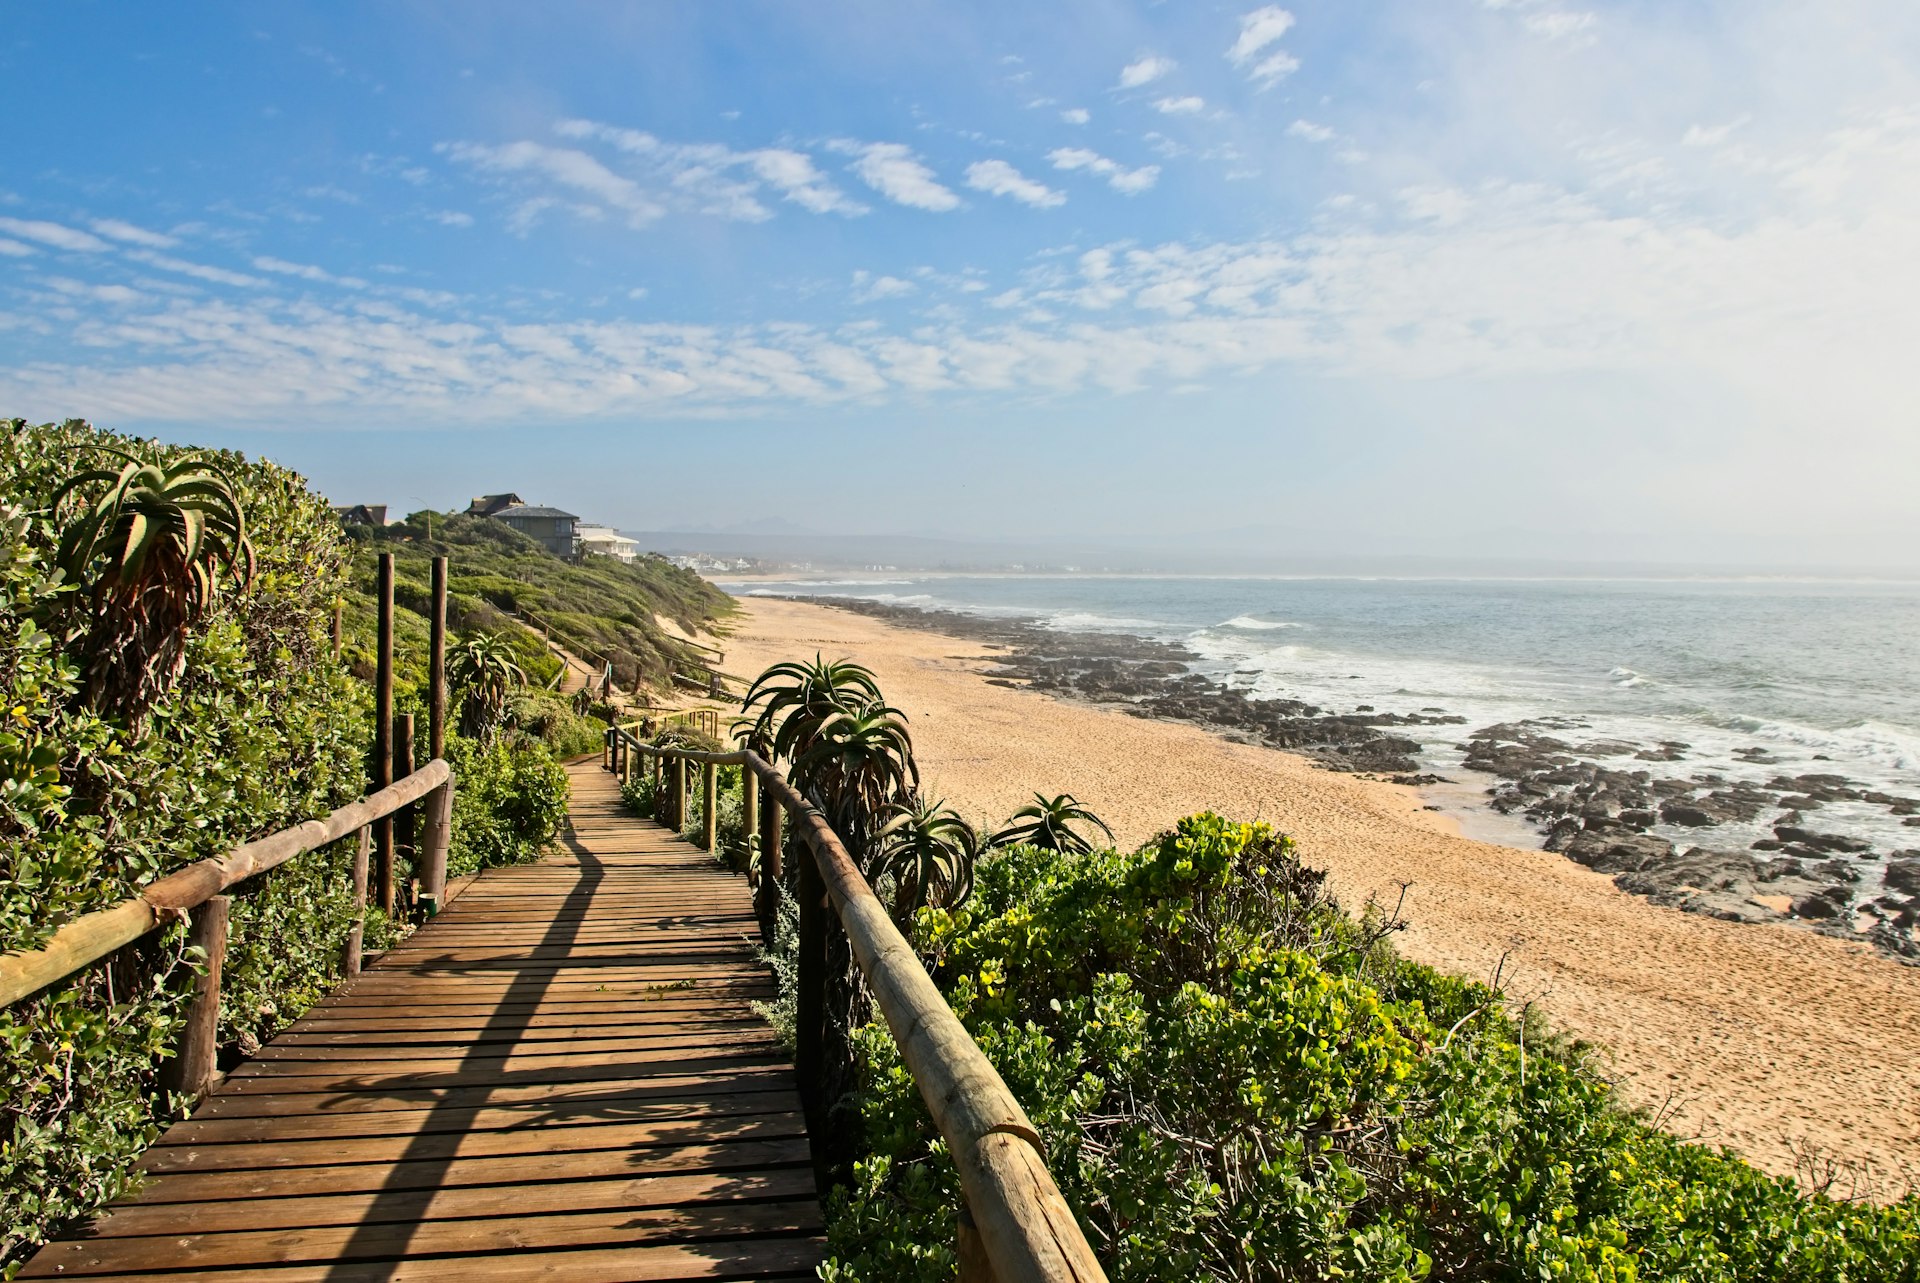 A plant-lined boardwalk leading down to a golden sand beach with some rocks near the sea